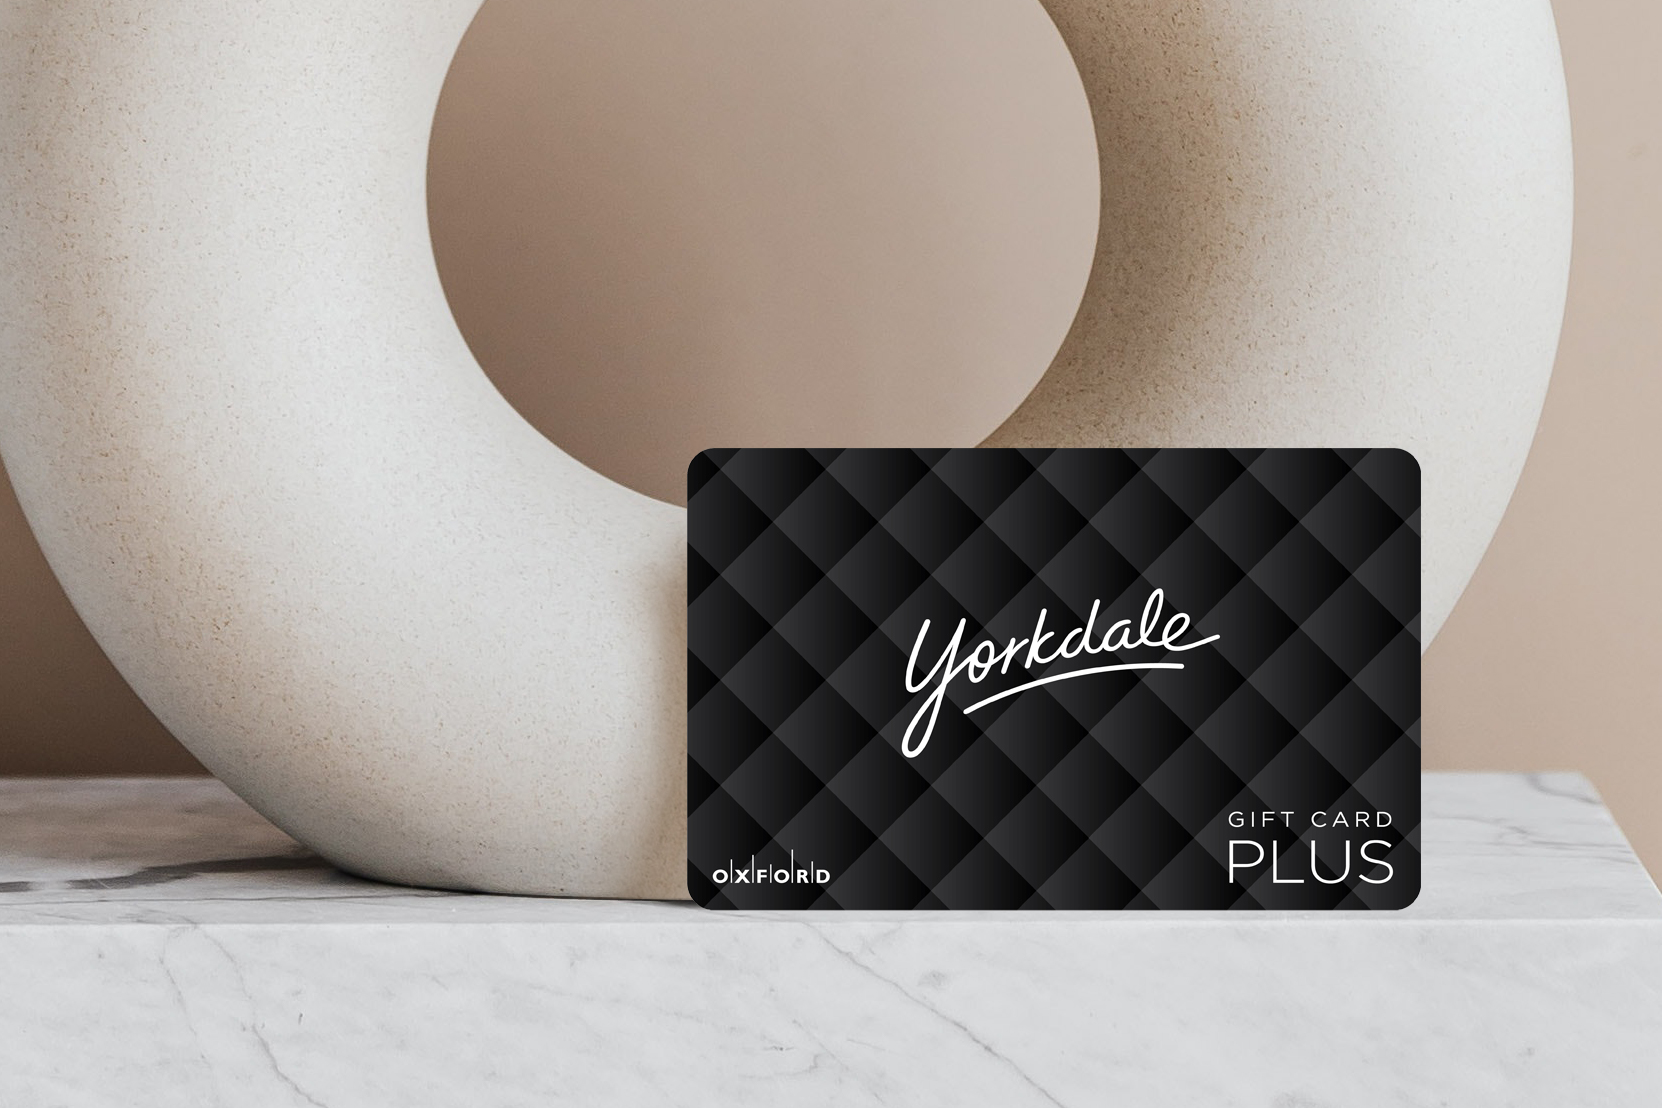 Yorkdale Gift Card